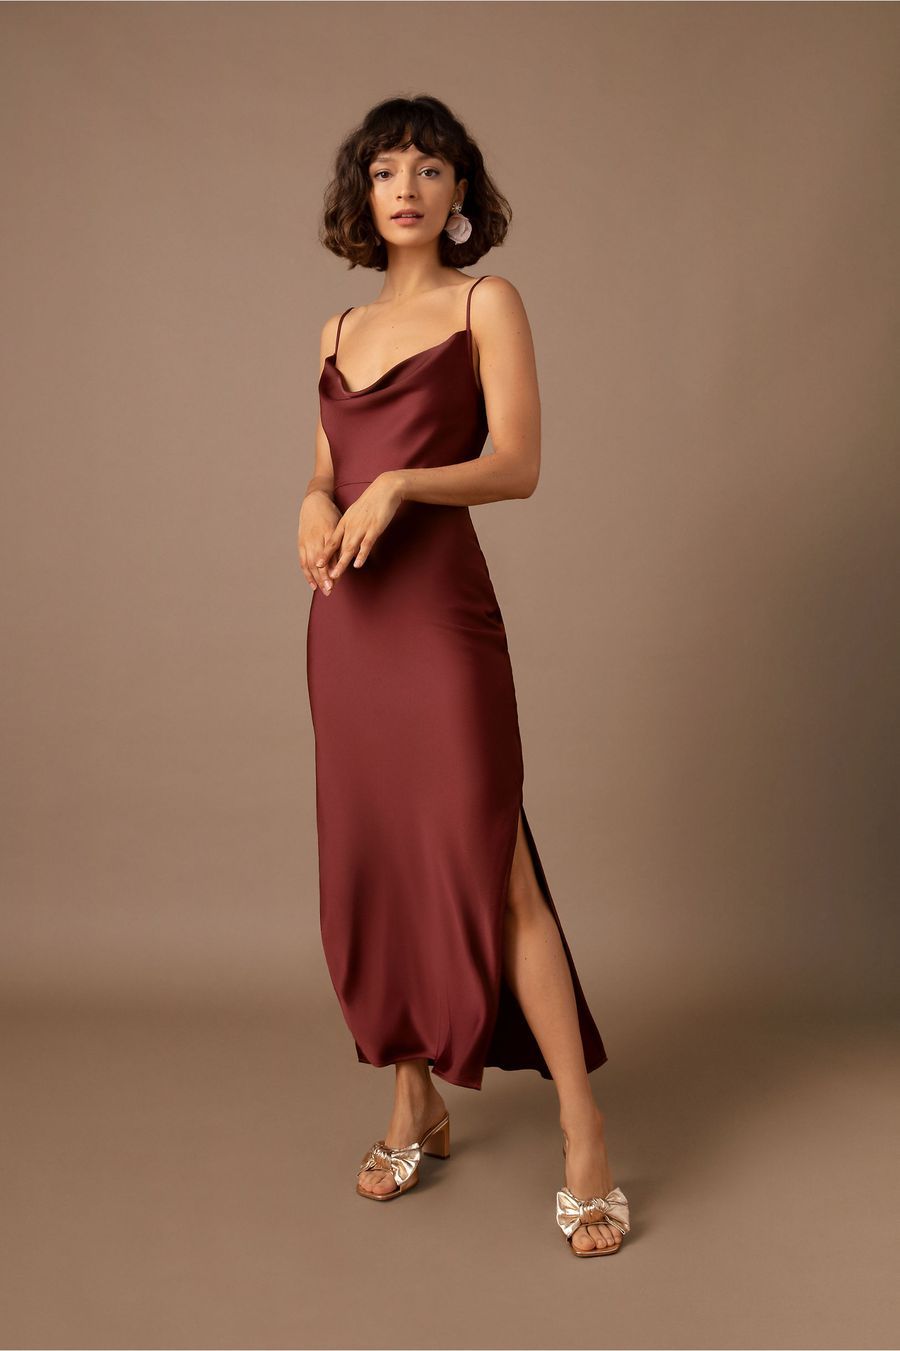 Perfect cocktail dresses for the evening
party